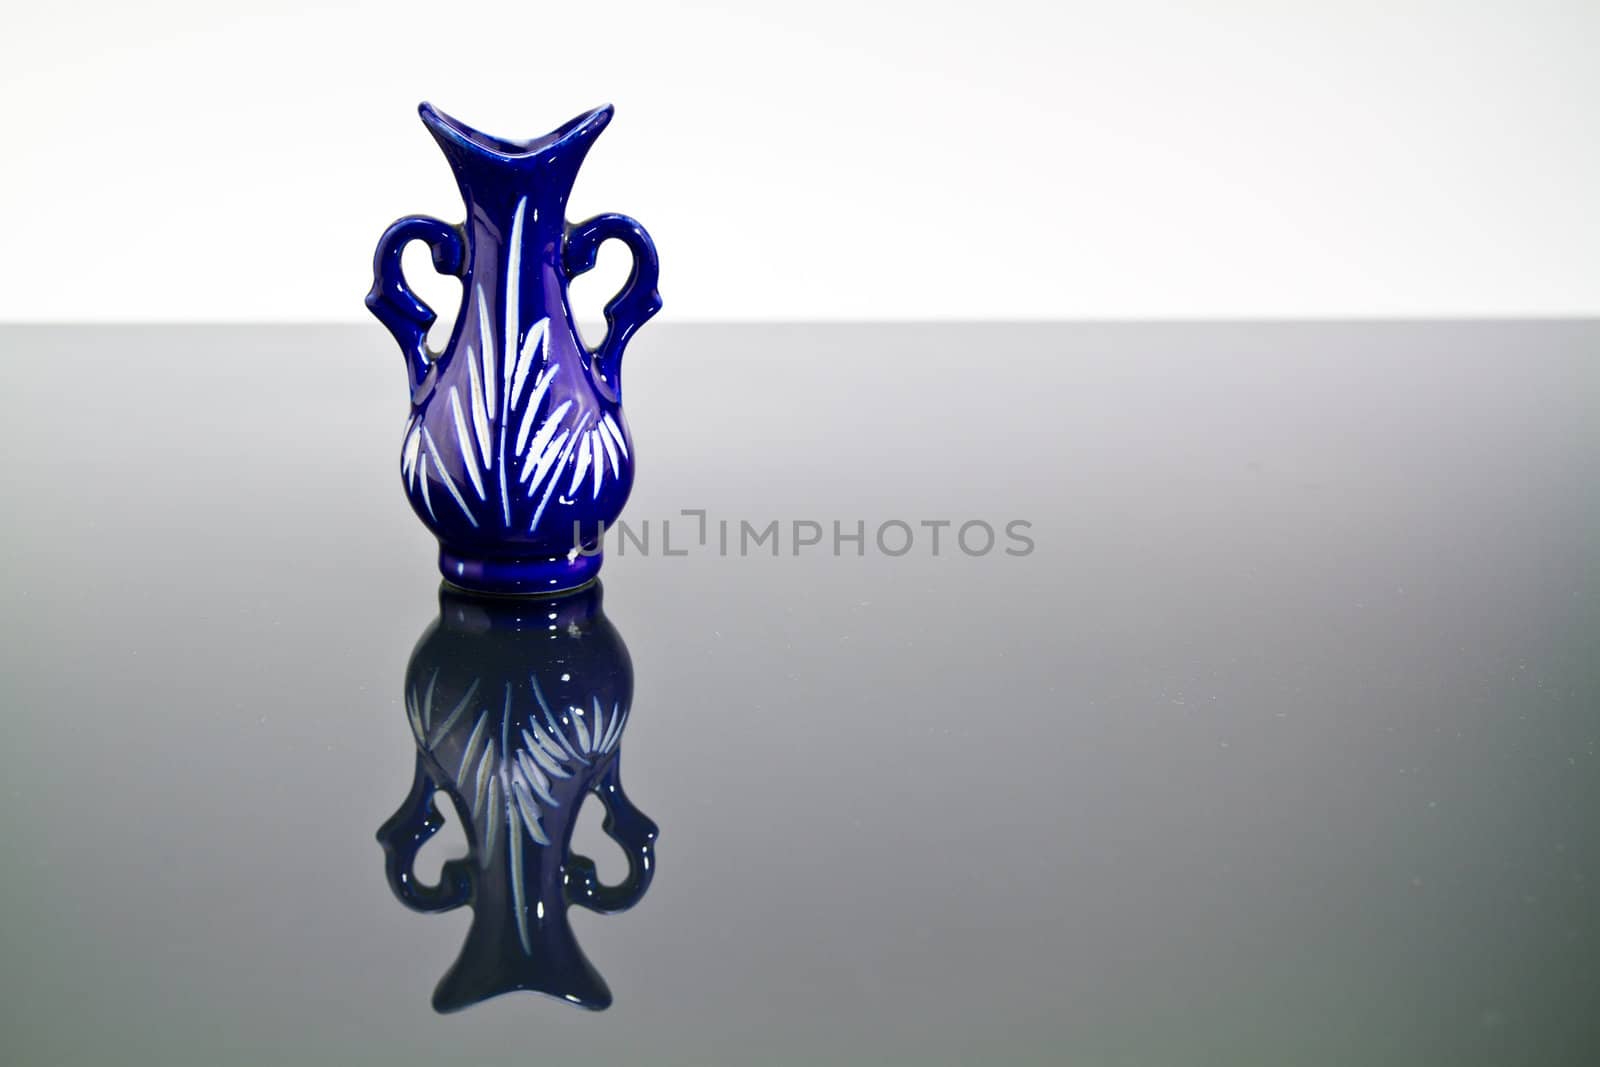 A blue empty vase on a mirror with dark and bright background and mirror image in landscape orientation